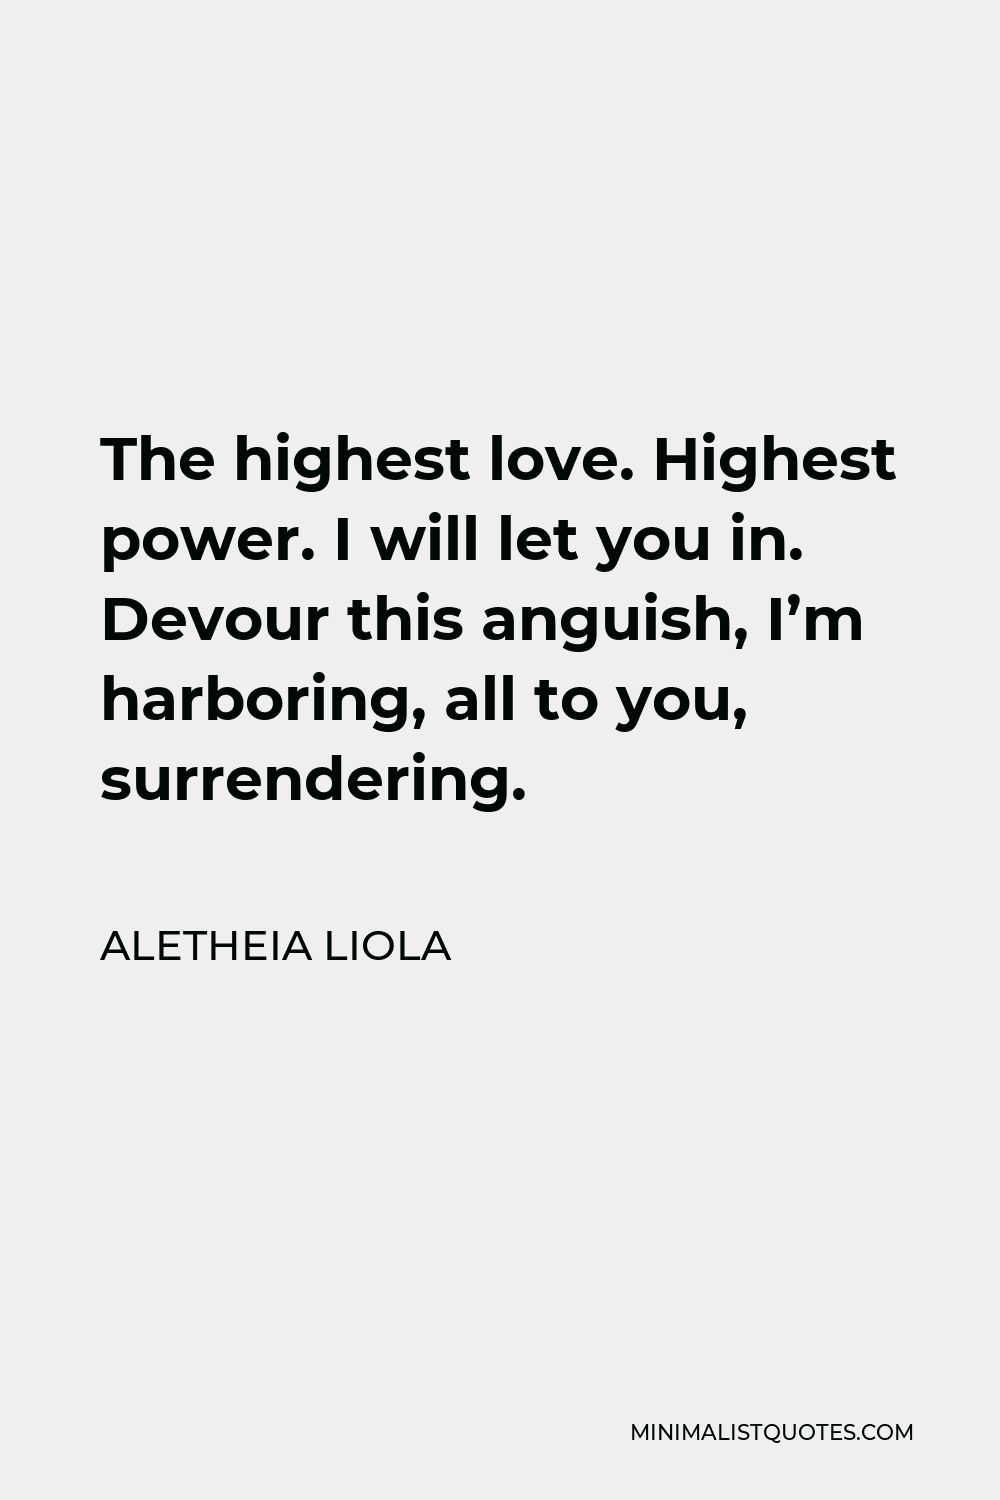 Aletheia Liola Quote - The highest love. Highest power. I will let you in. Devour this anguish, I’m harboring, all to you, surrendering.